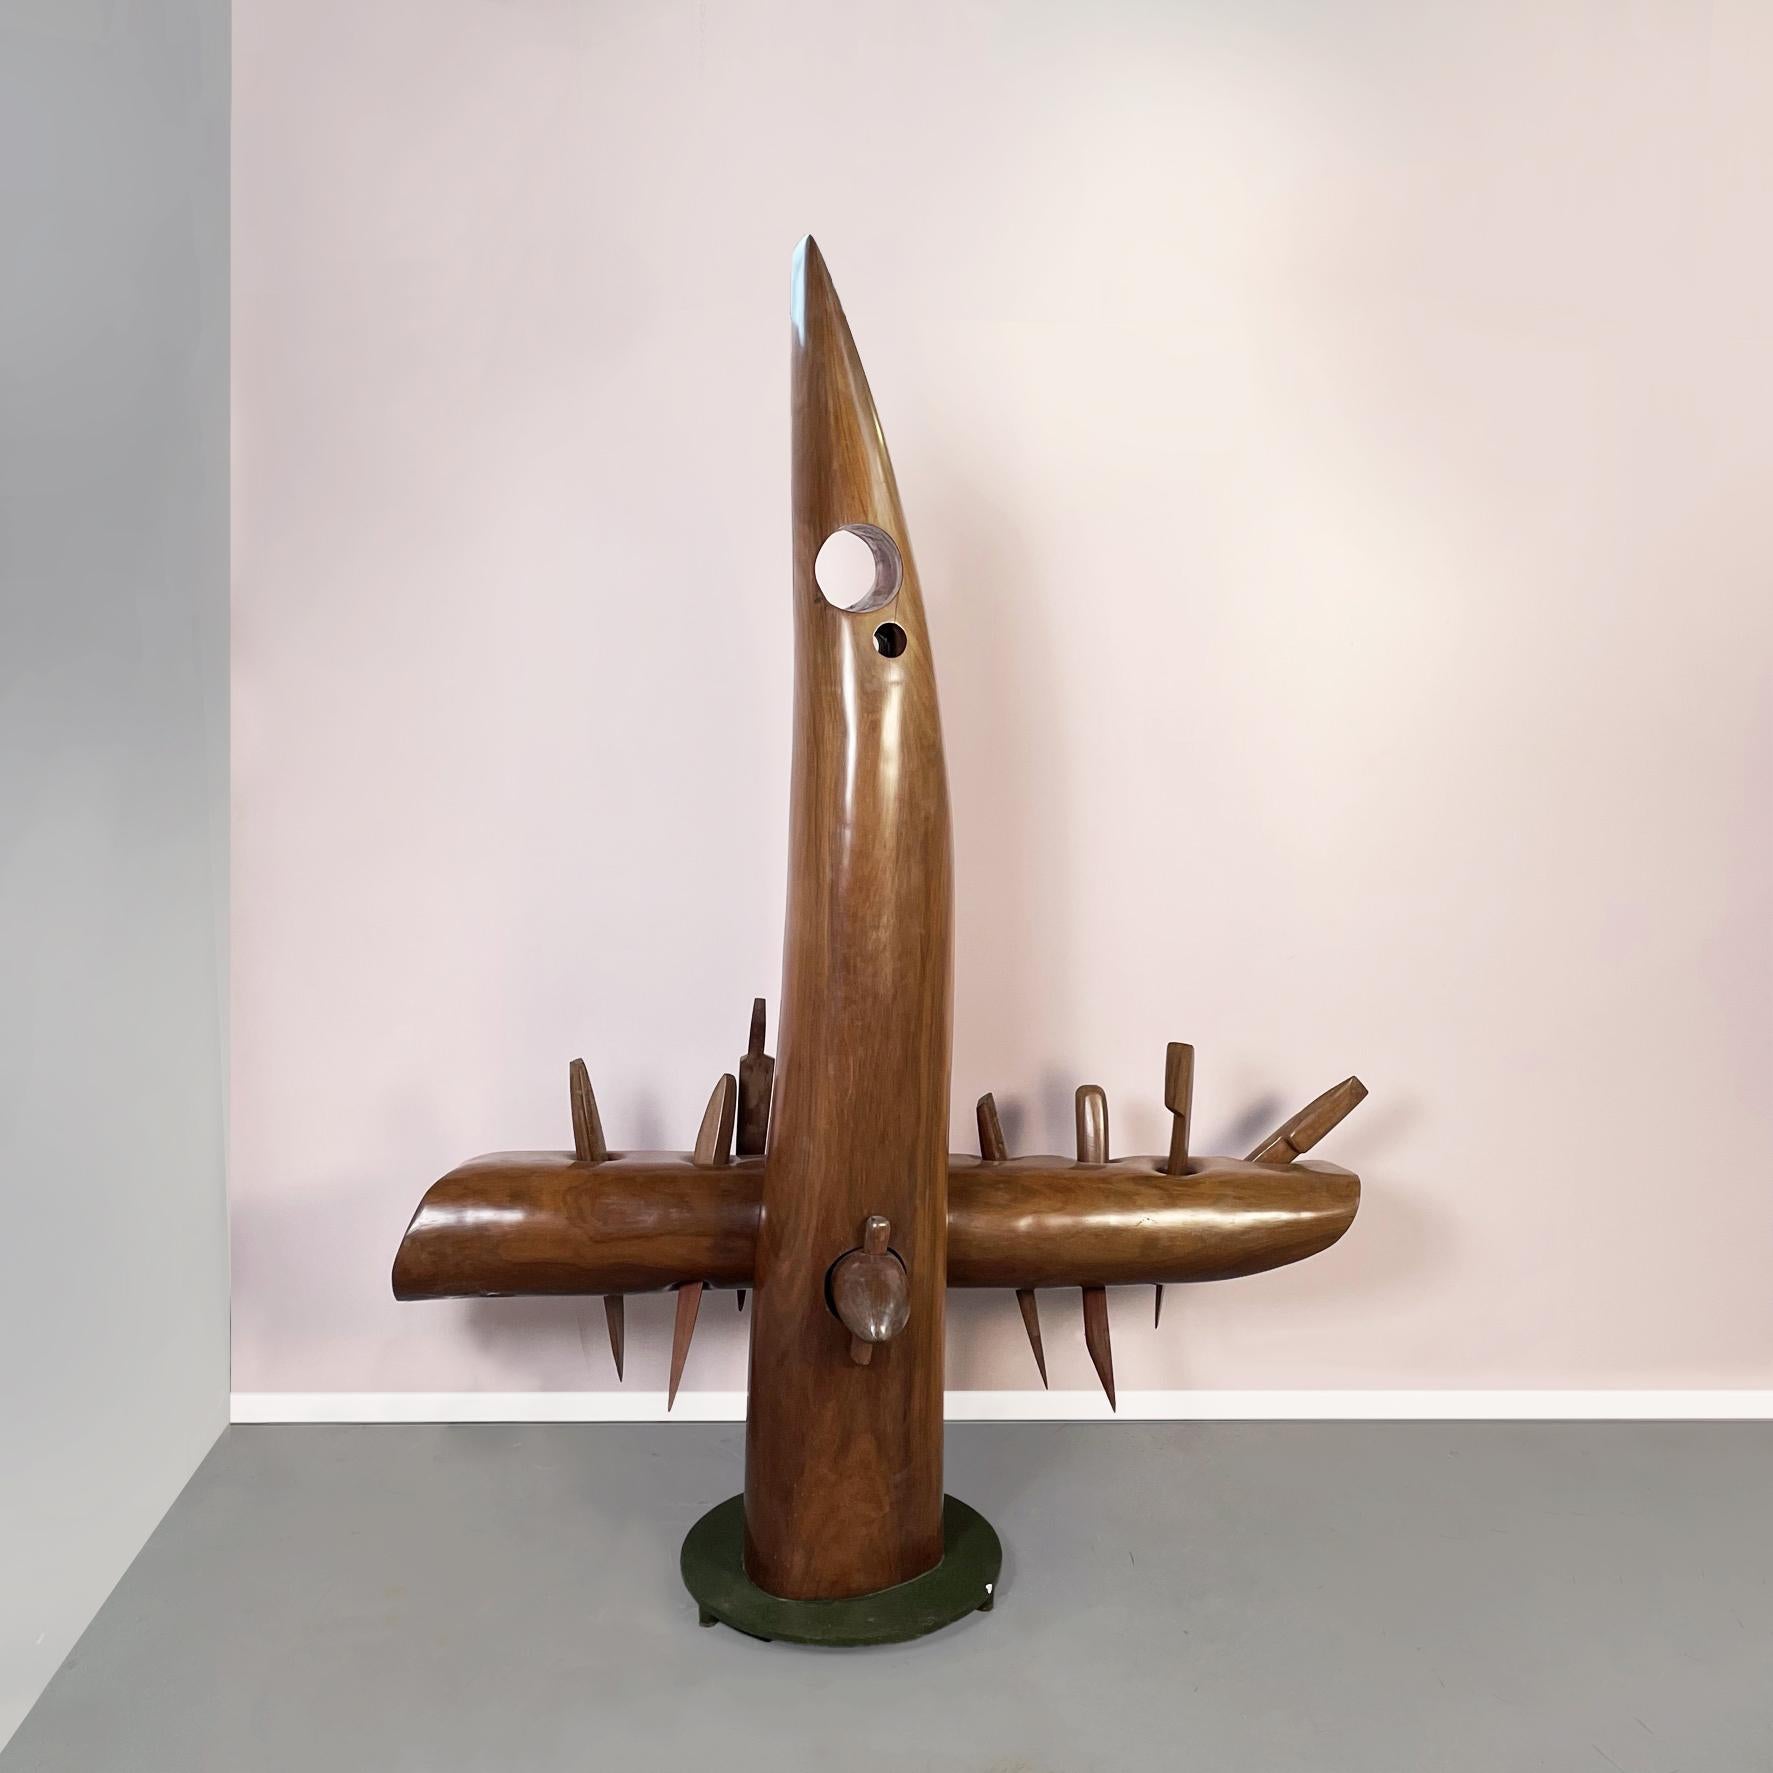 Italian mid-century wooden sculpture The Tree of the 7 knives by Becheroni, 1970s.
Sculpture entitled 